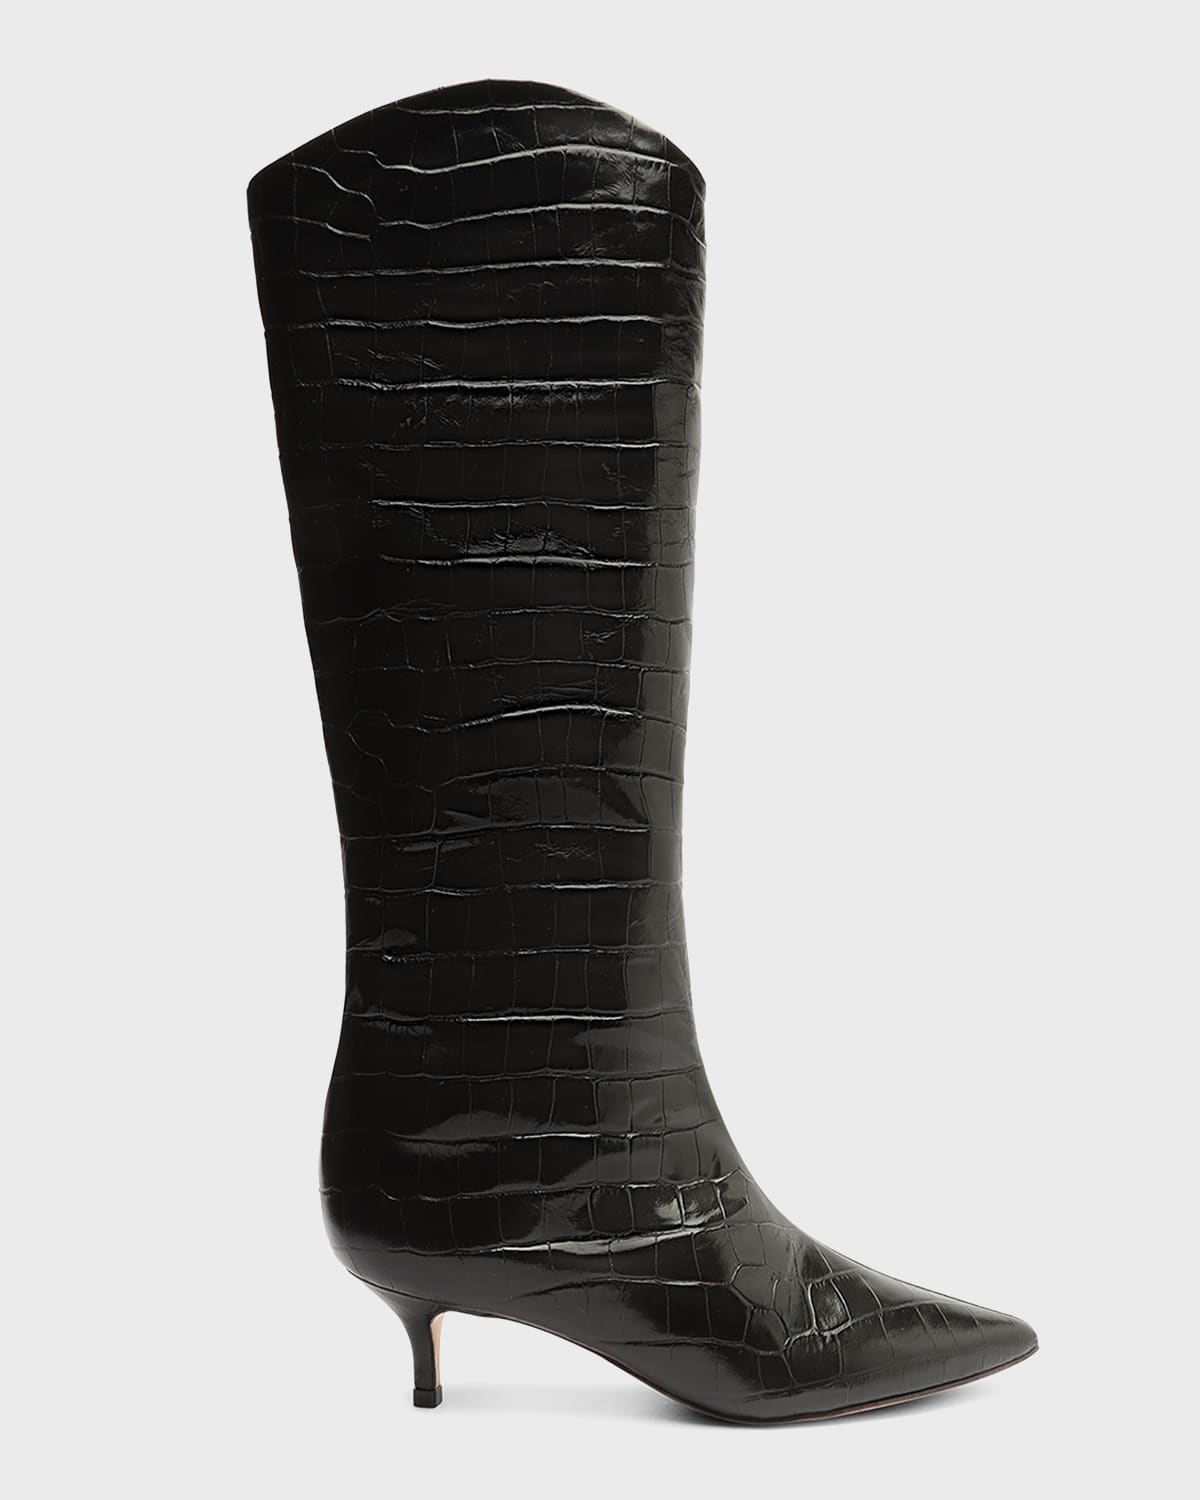 Maryana Croc-Embossed Leather Boots